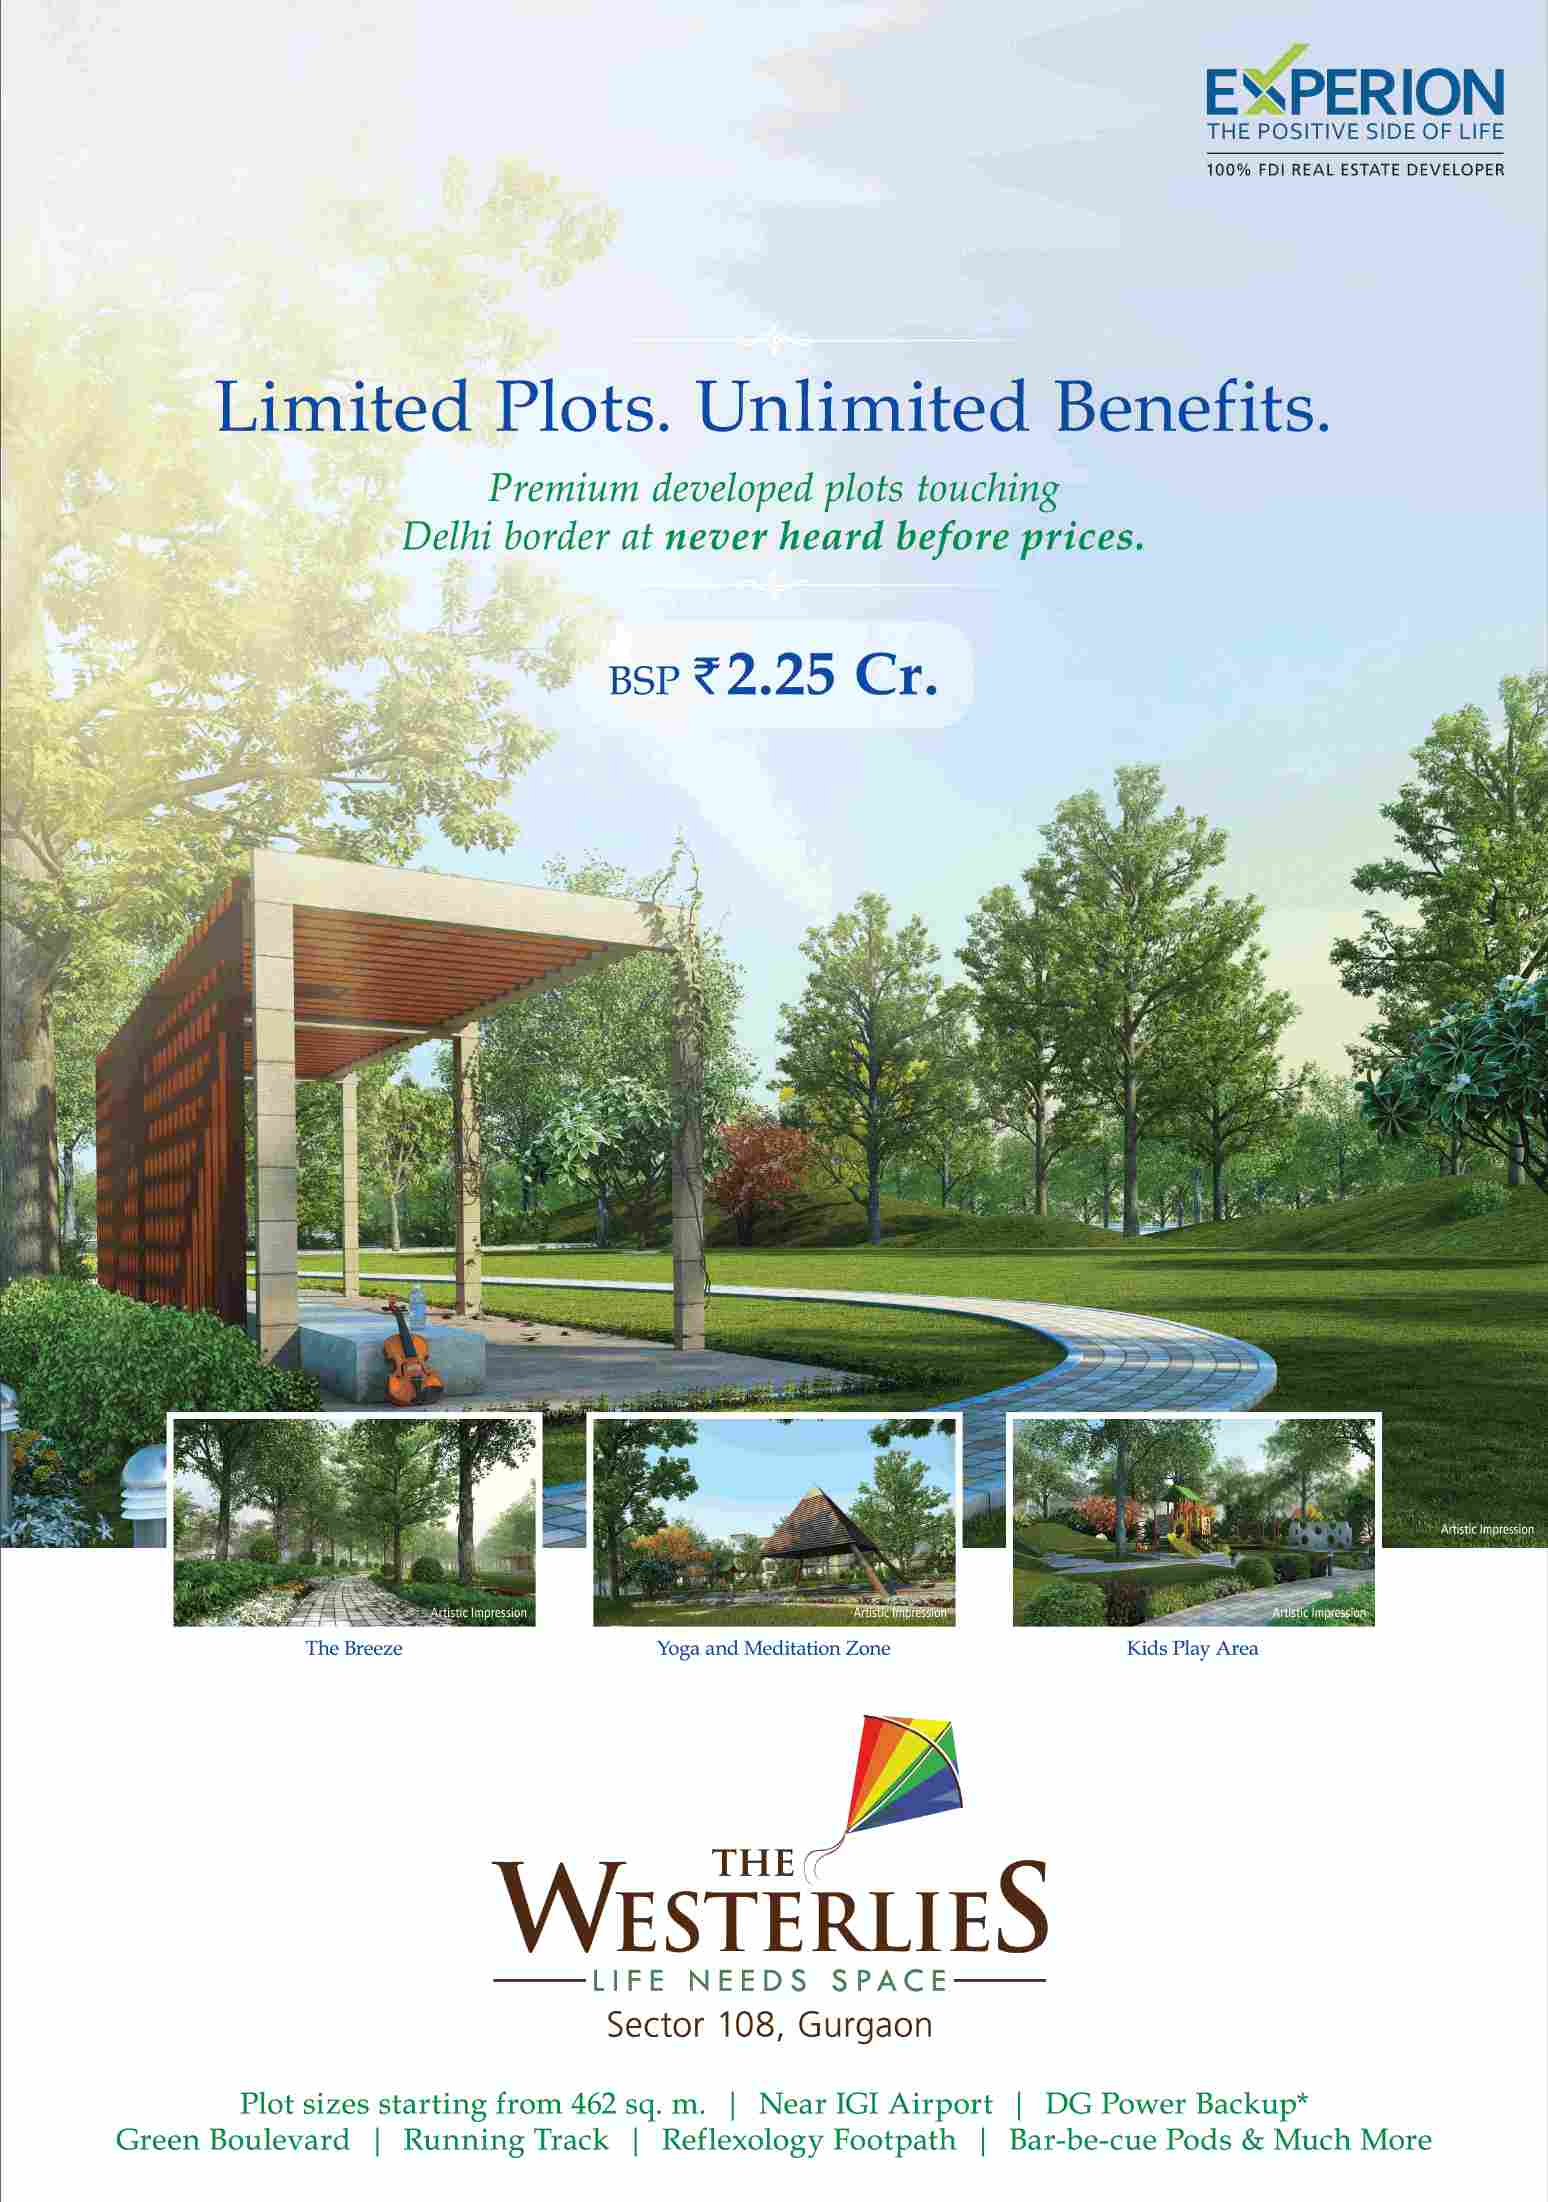 Book premium developed plots @ BSP 2.25 cr. at Experion The Westerlies in Gurgaon